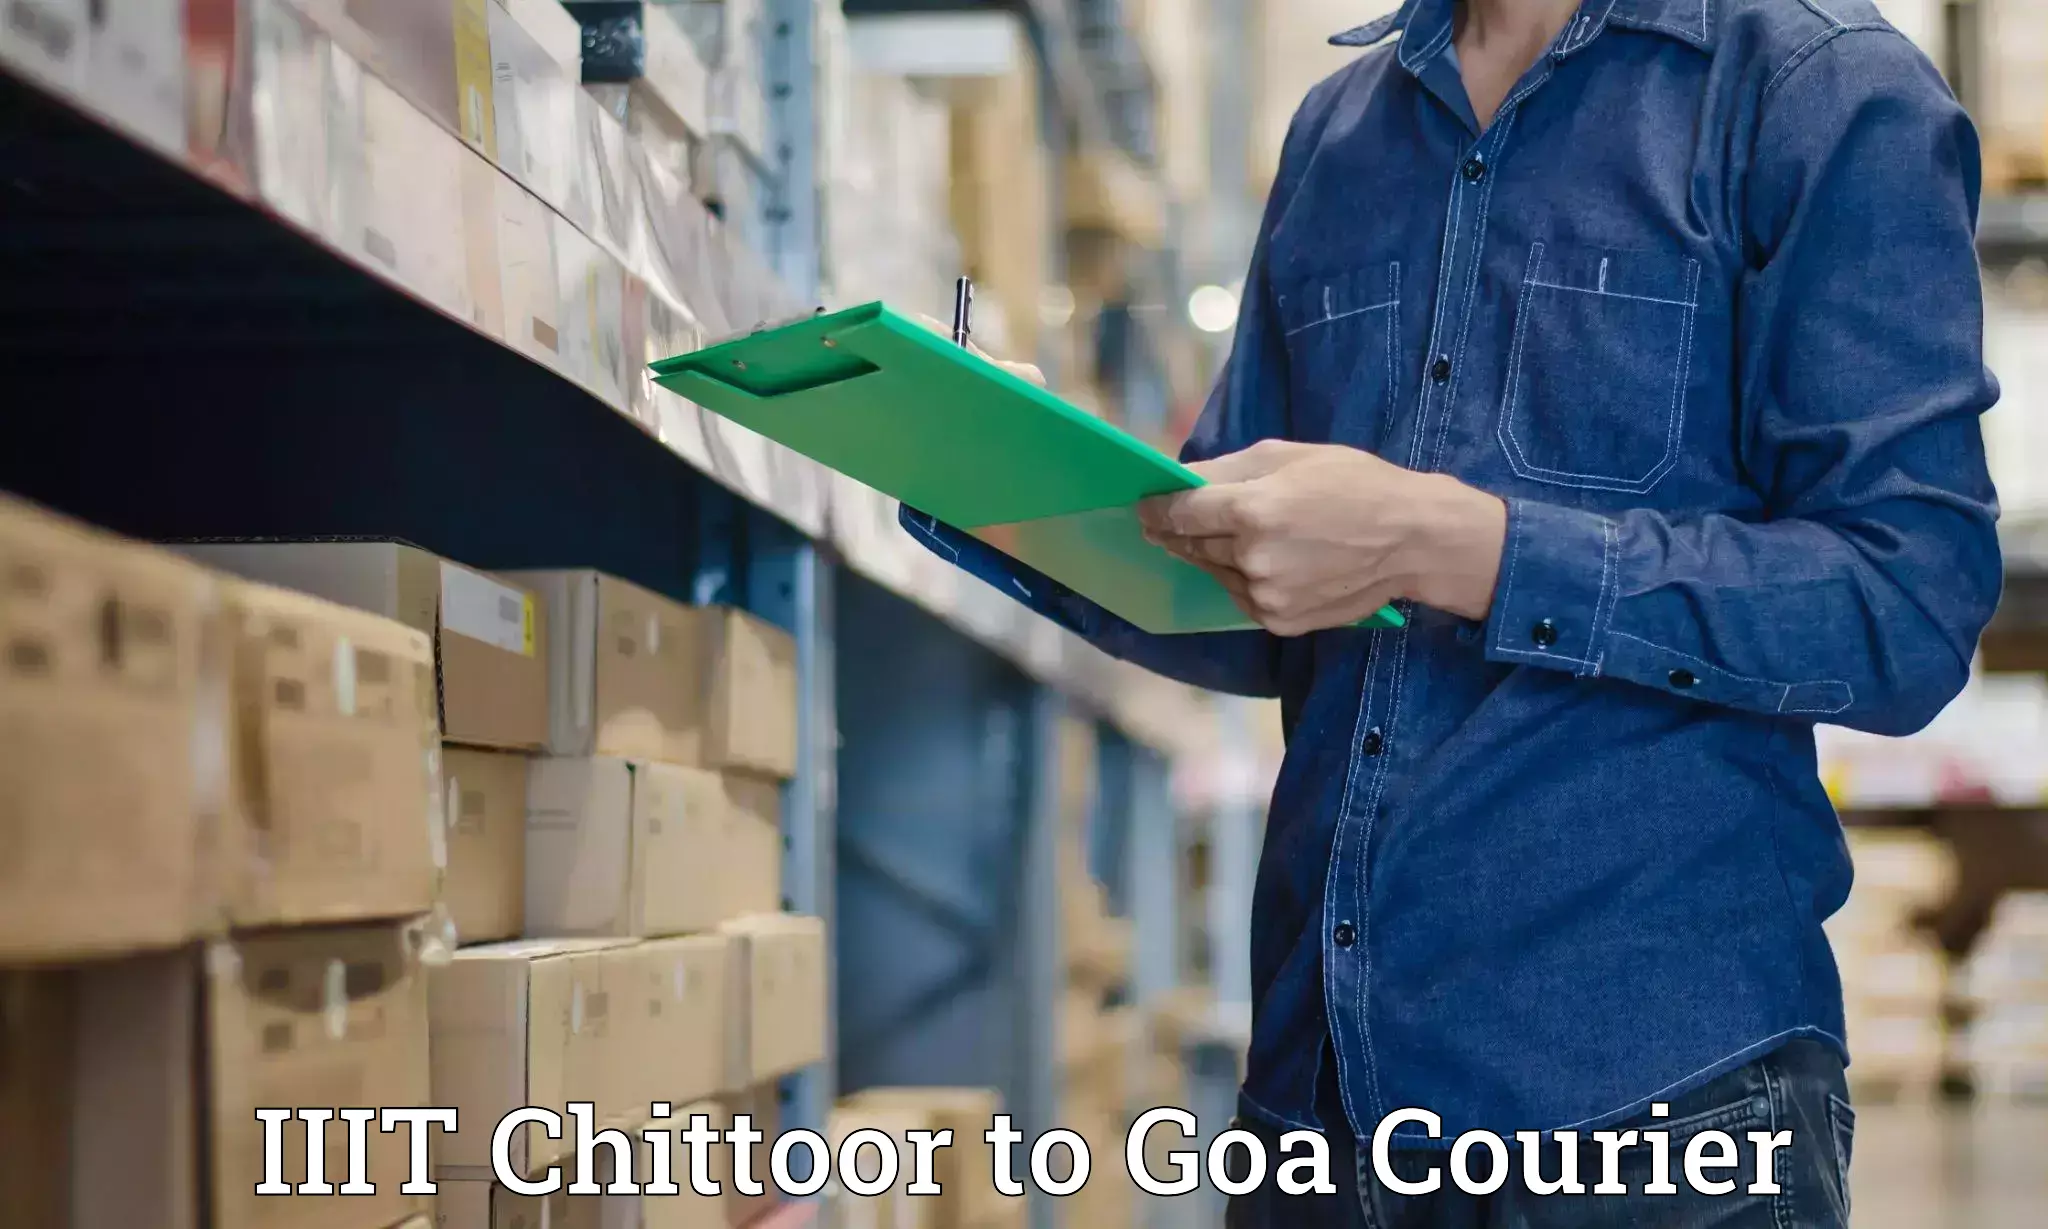 Residential courier service IIIT Chittoor to Mormugao Port